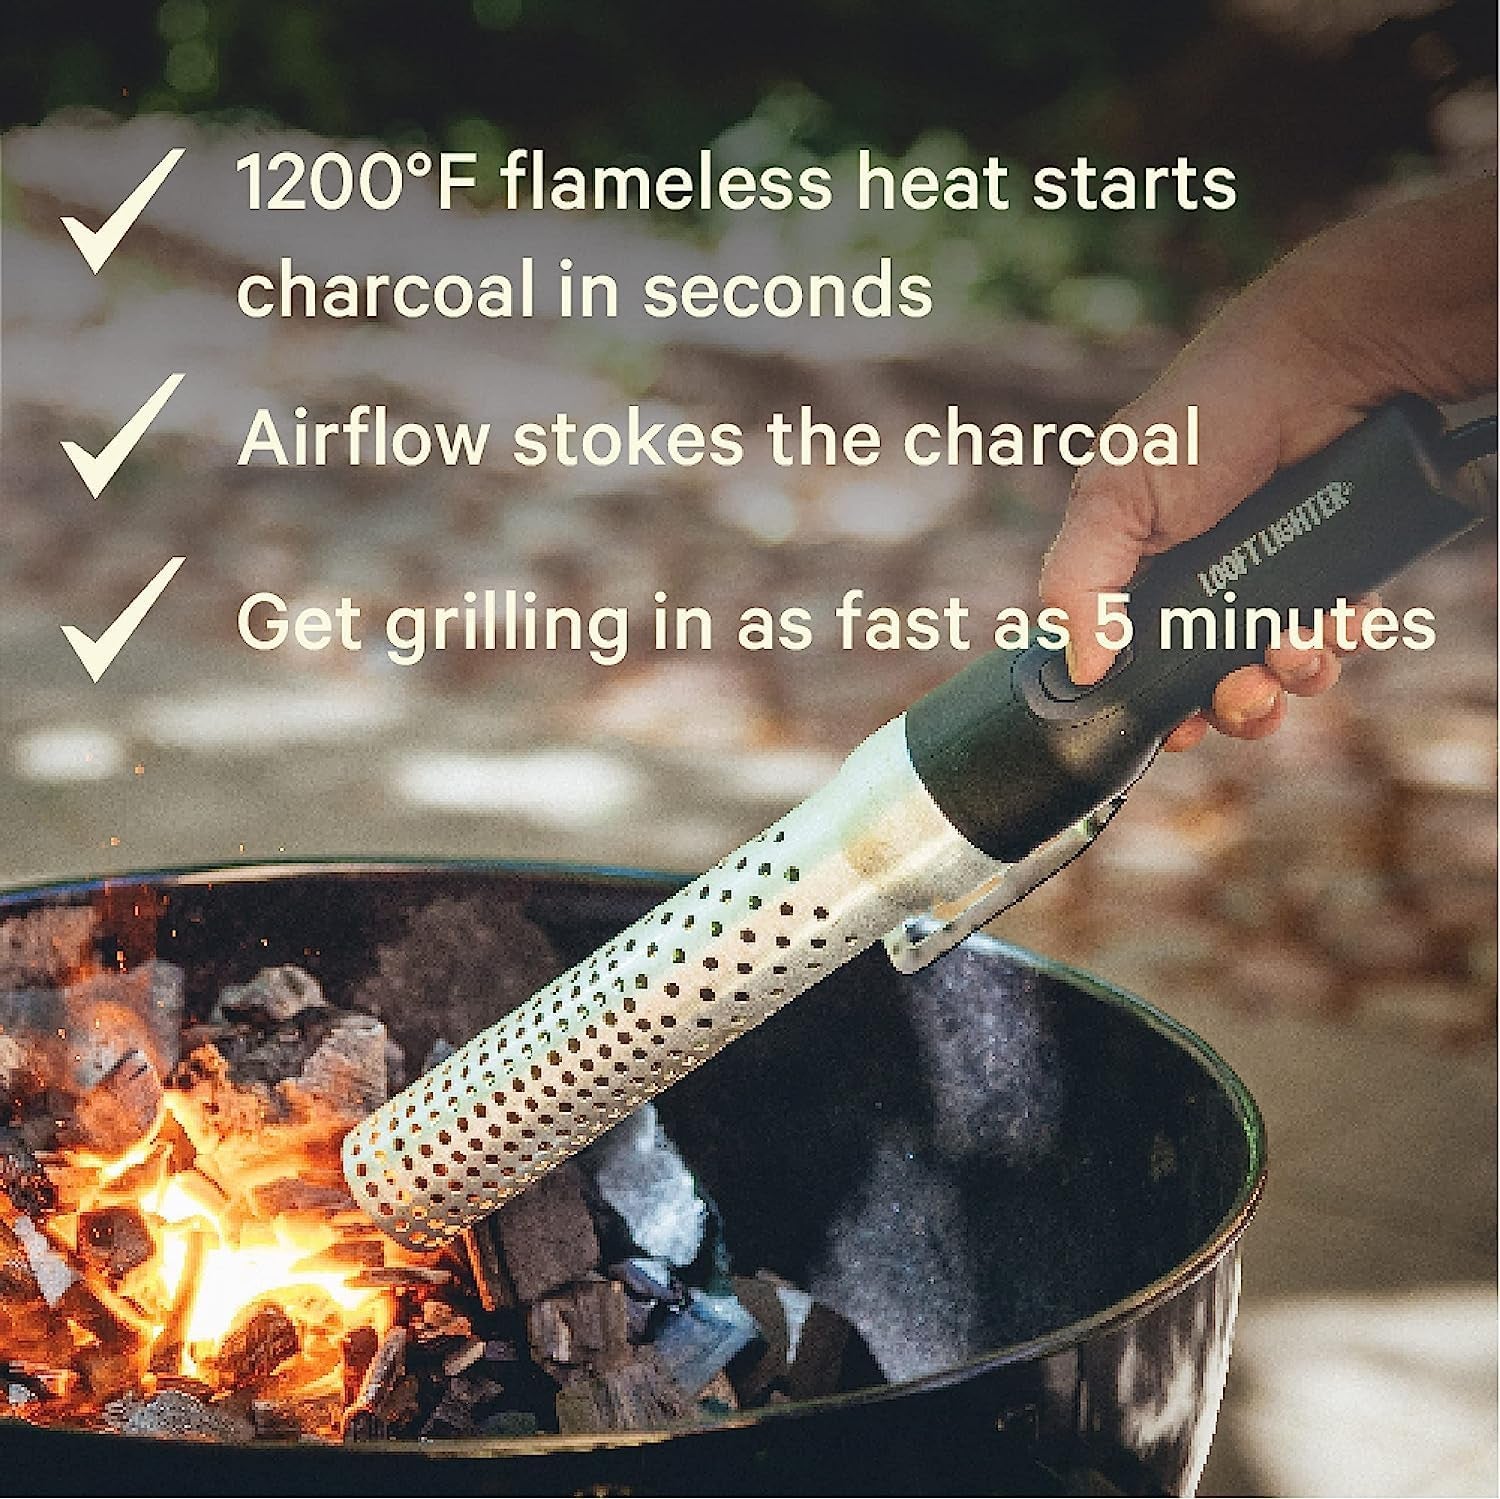 Looft Lighter 1 | All-Electric Charcoal Starter | Super Heated Air Reaches 1200°F in 60 Sec | Lights All Fuels: Briquettes, Fireplace Logs, and More